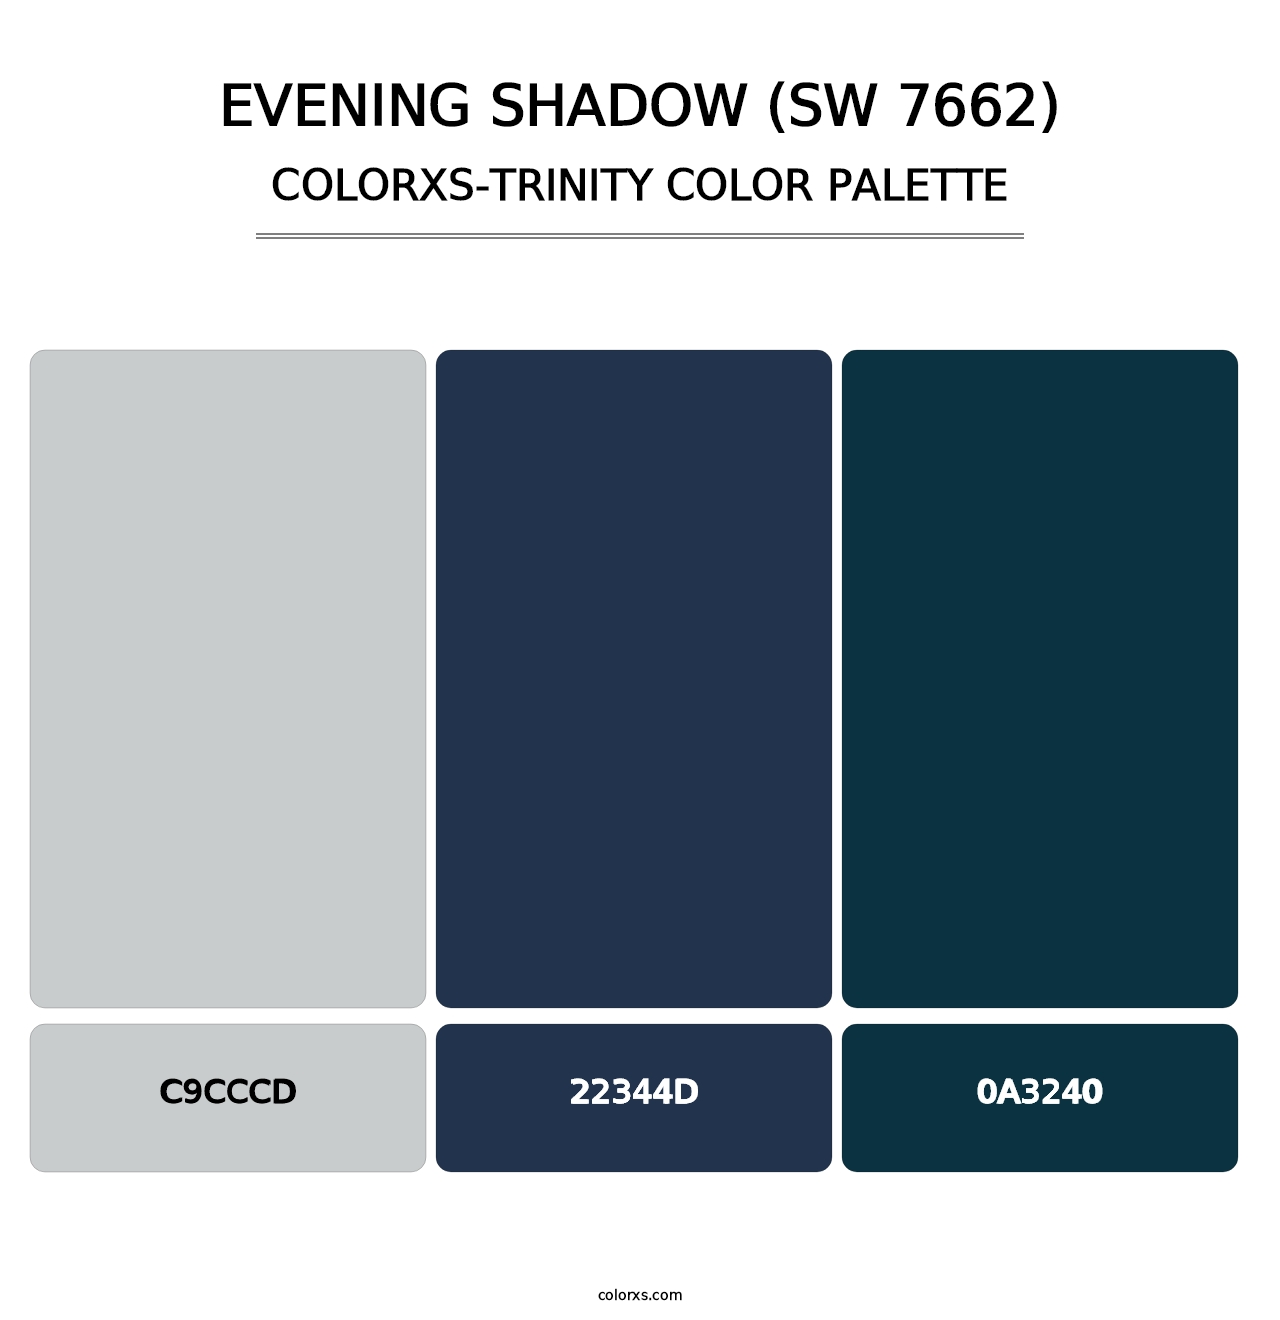 Evening Shadow (SW 7662) - Colorxs Trinity Palette